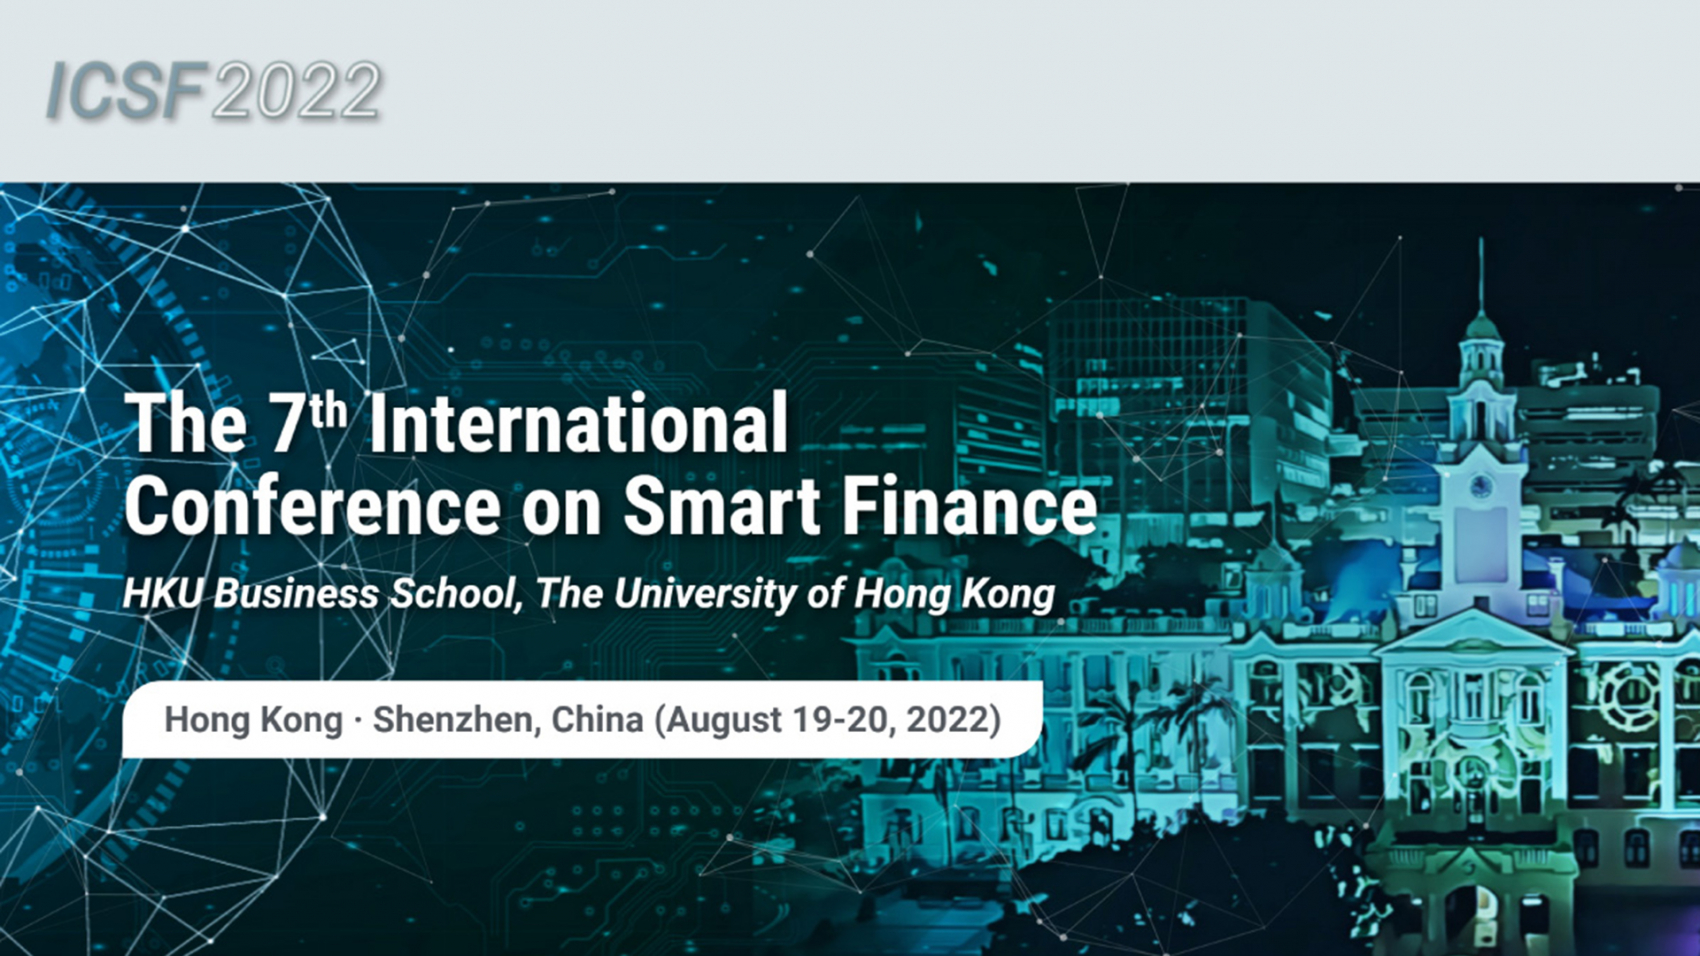 The 7th International Conference on Smart Finance